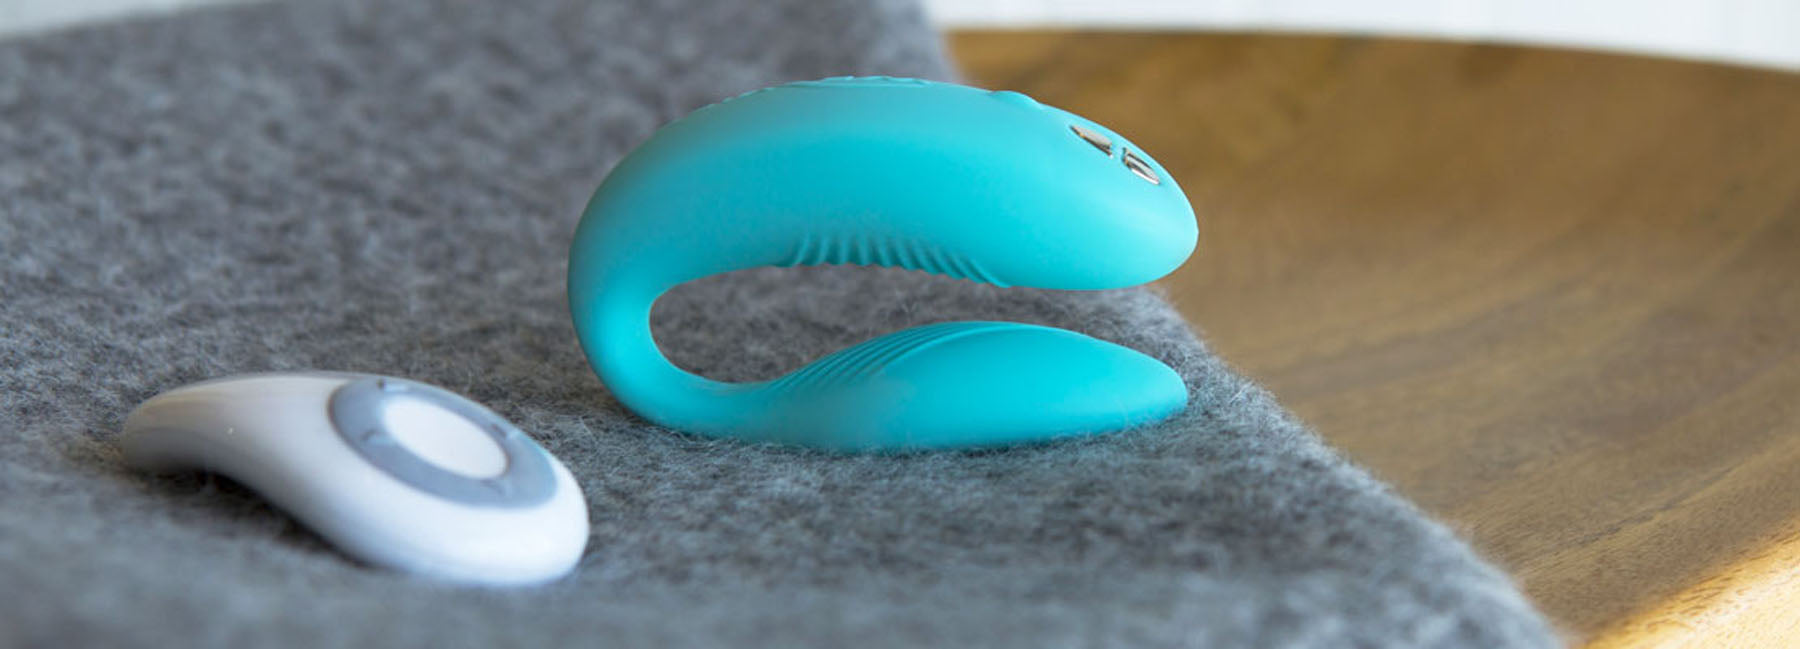 We-Vibe Sync Review - Good Things Come in Small Packages